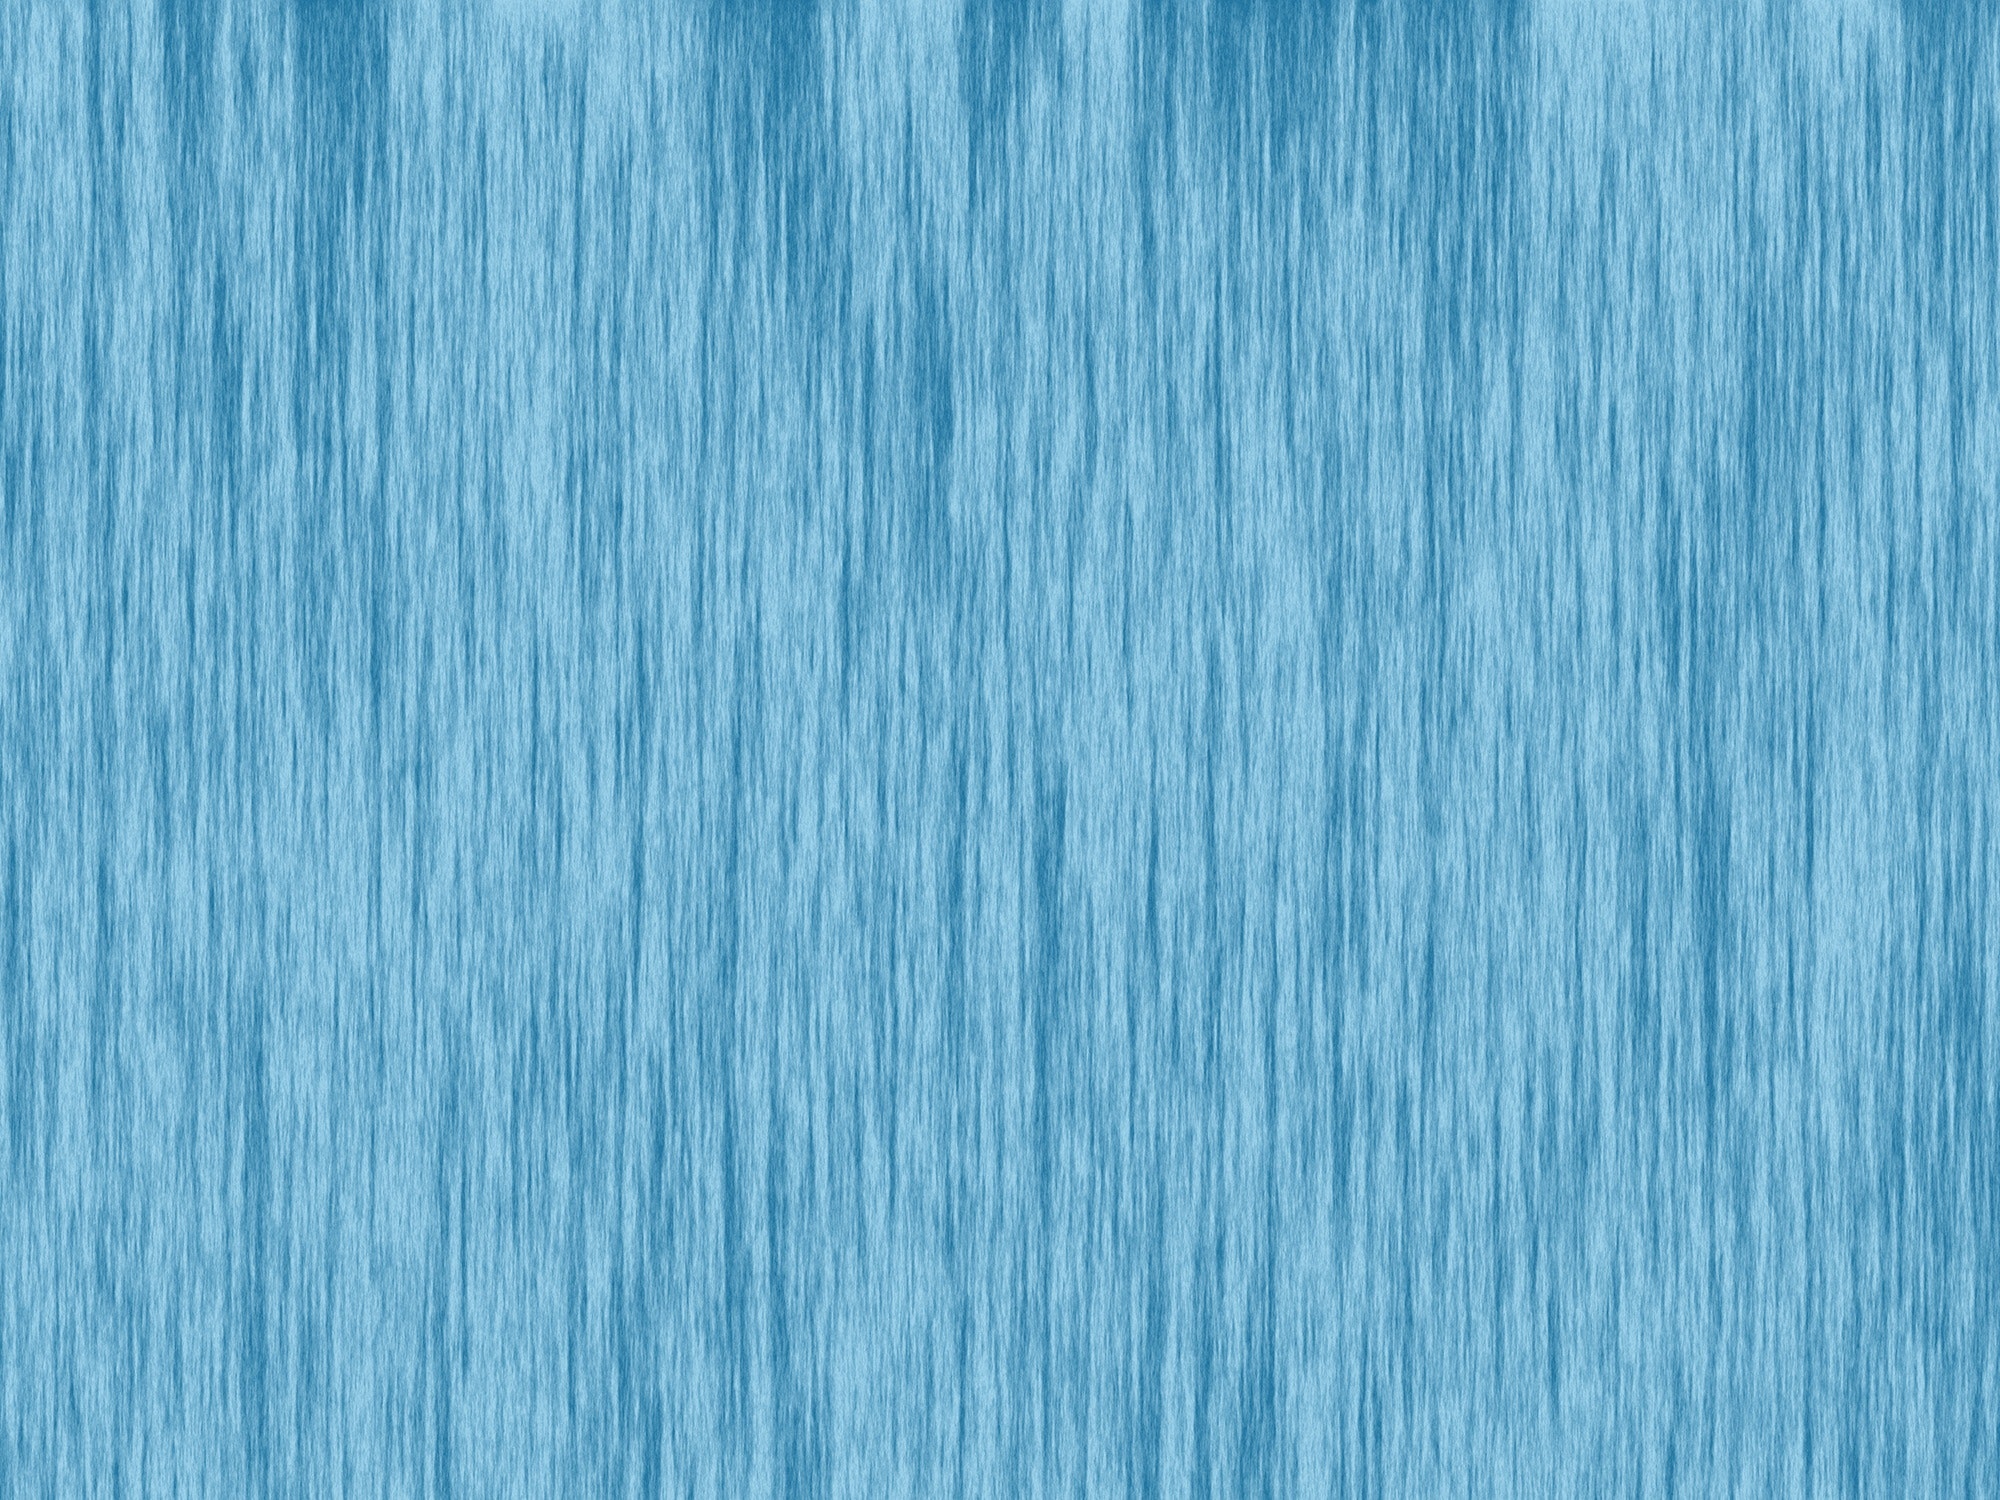 Medium blue abstract background of vertical texture similar tv static